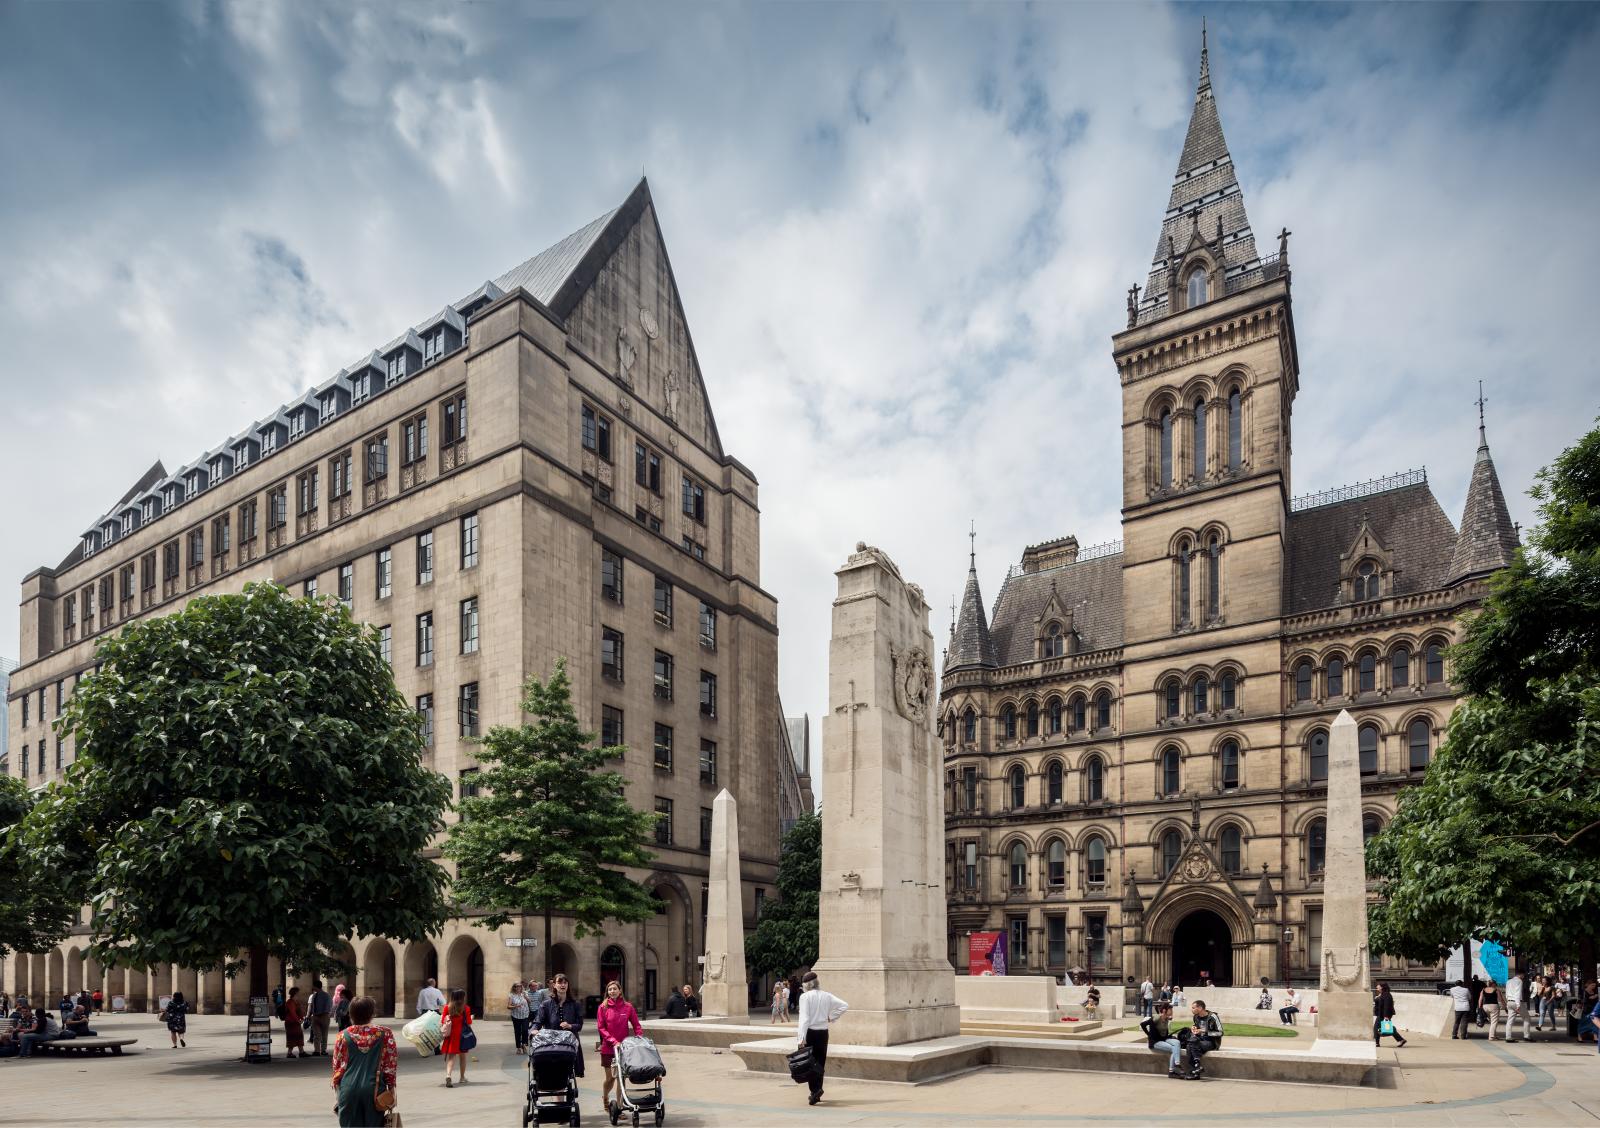 Manchester Town Hall and extension with cenotaph and pedestrians in the foreground.